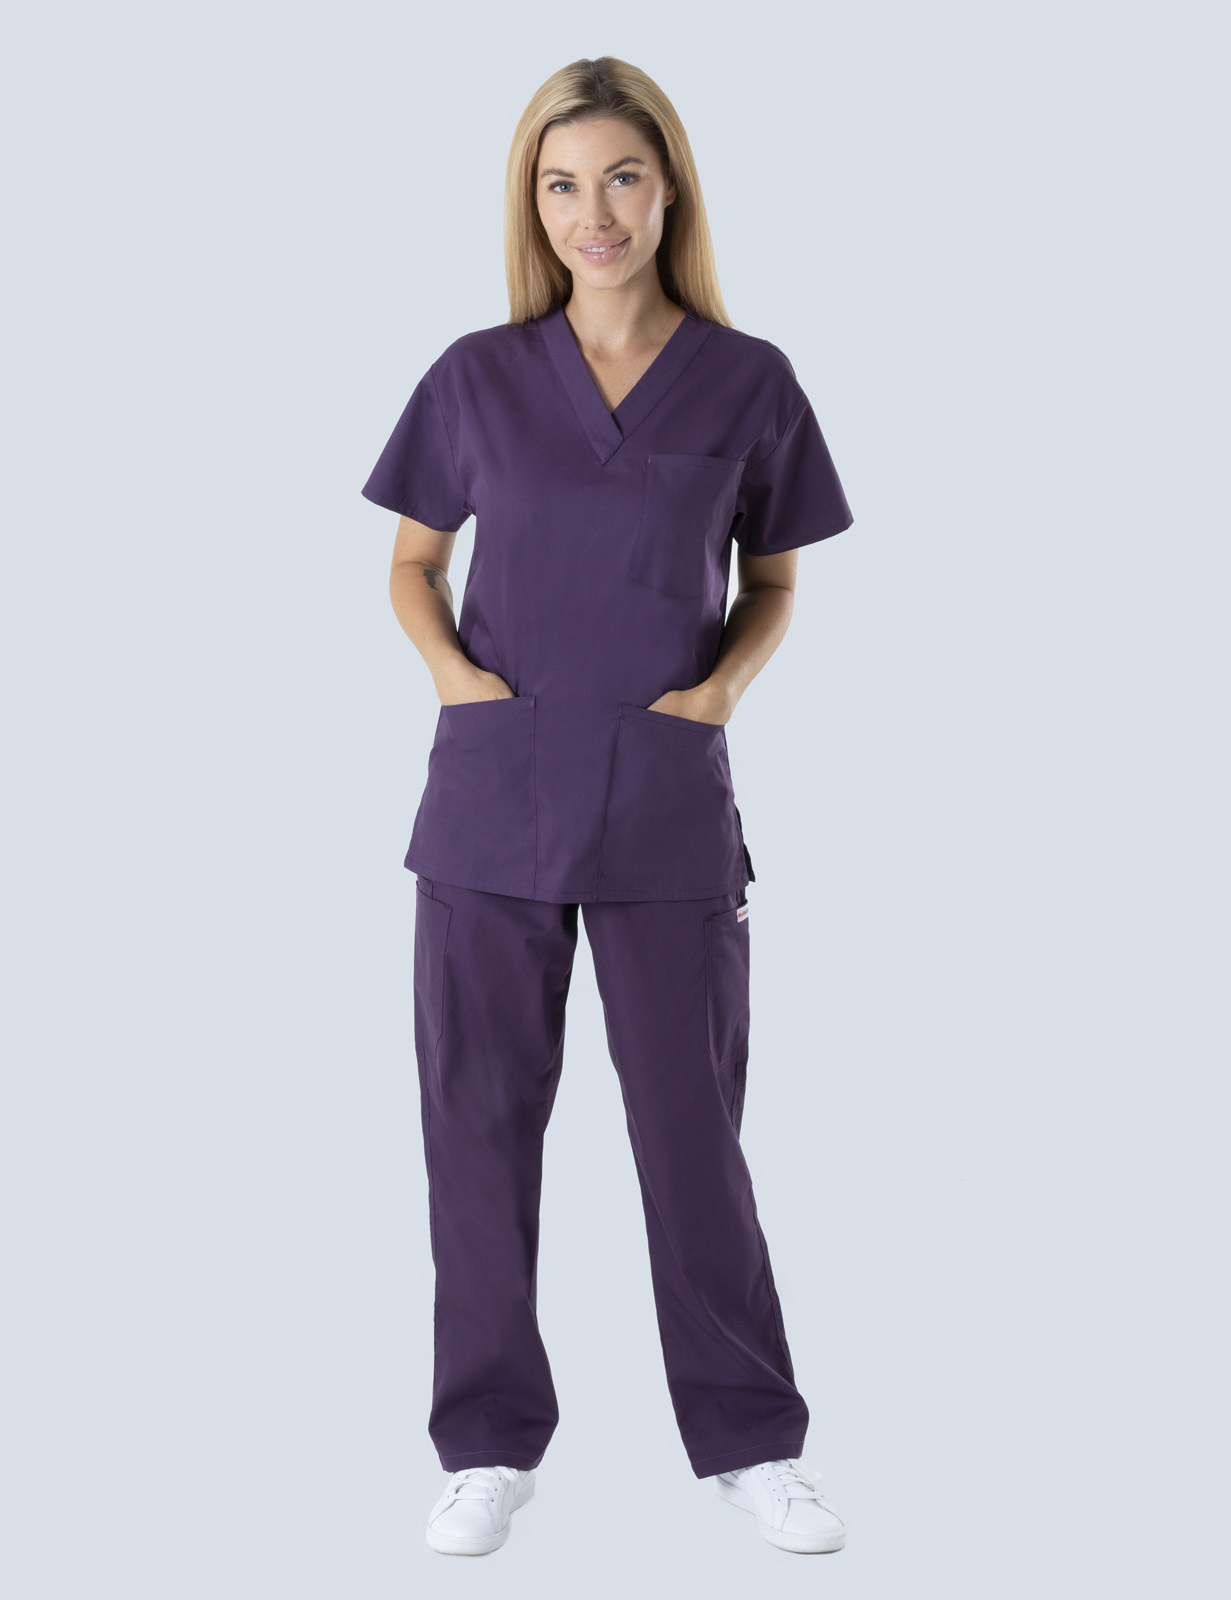 SCPU Hospital - Midwife (4 Pocket Scrub Top and Cargo Pants in Aubergine incl Logos)